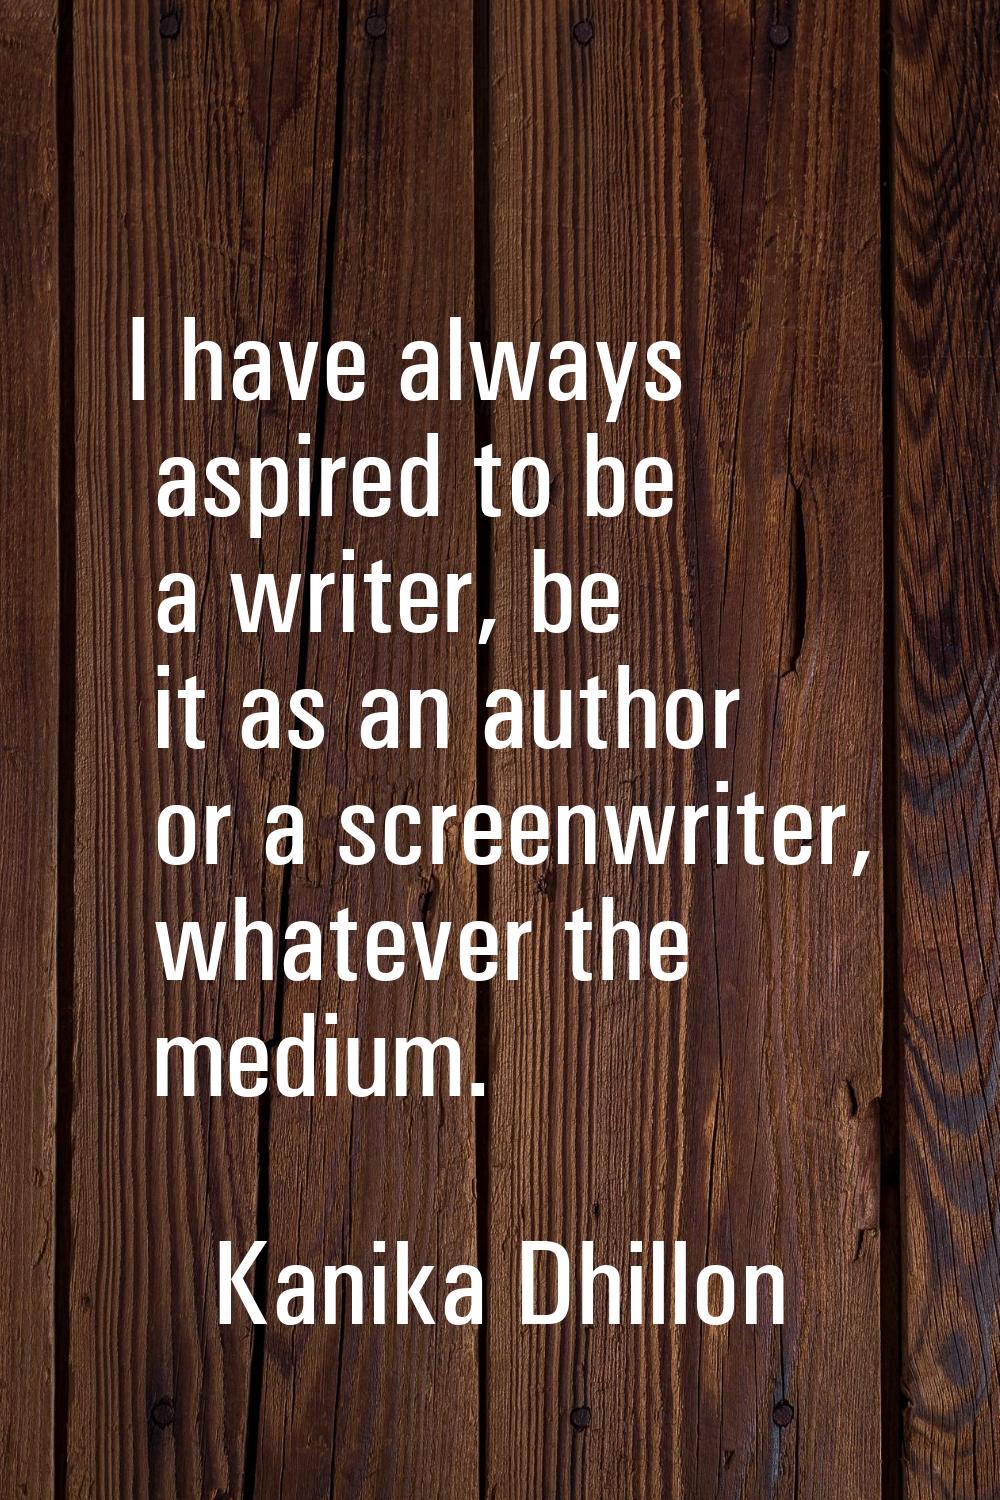 I have always aspired to be a writer, be it as an author or a screenwriter, whatever the medium.